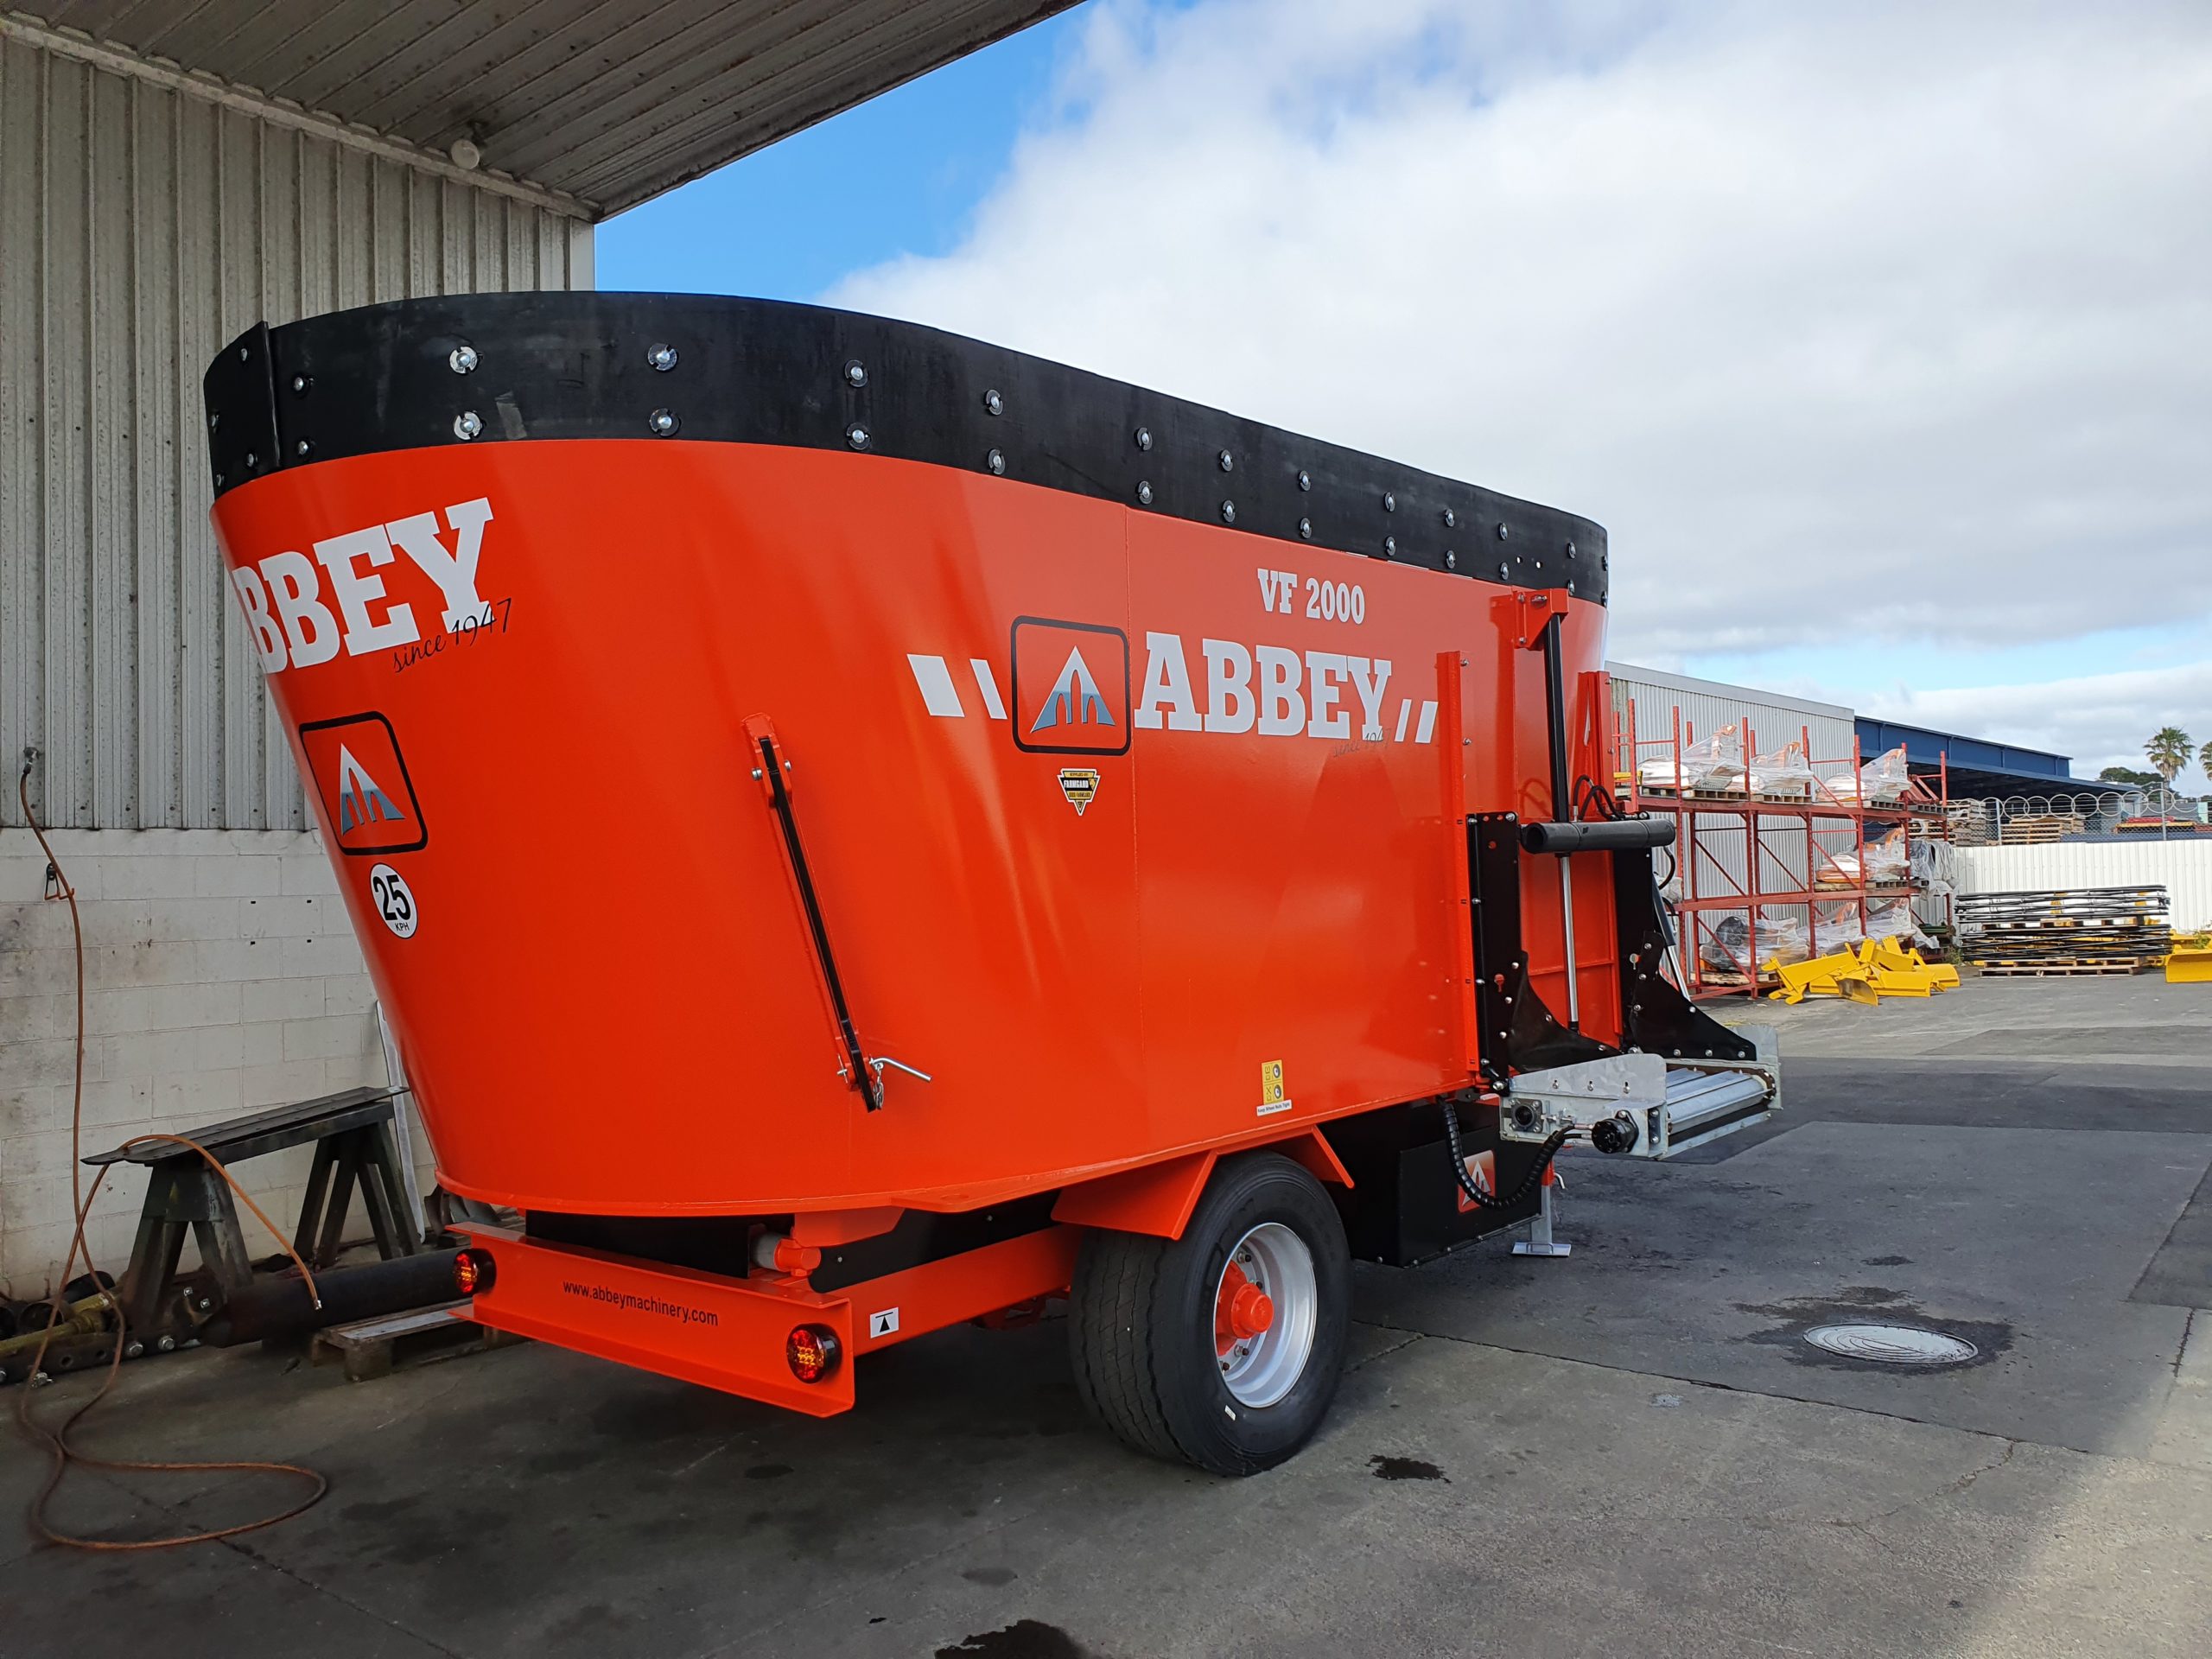 Abbey Single Auger Mixer Wagons